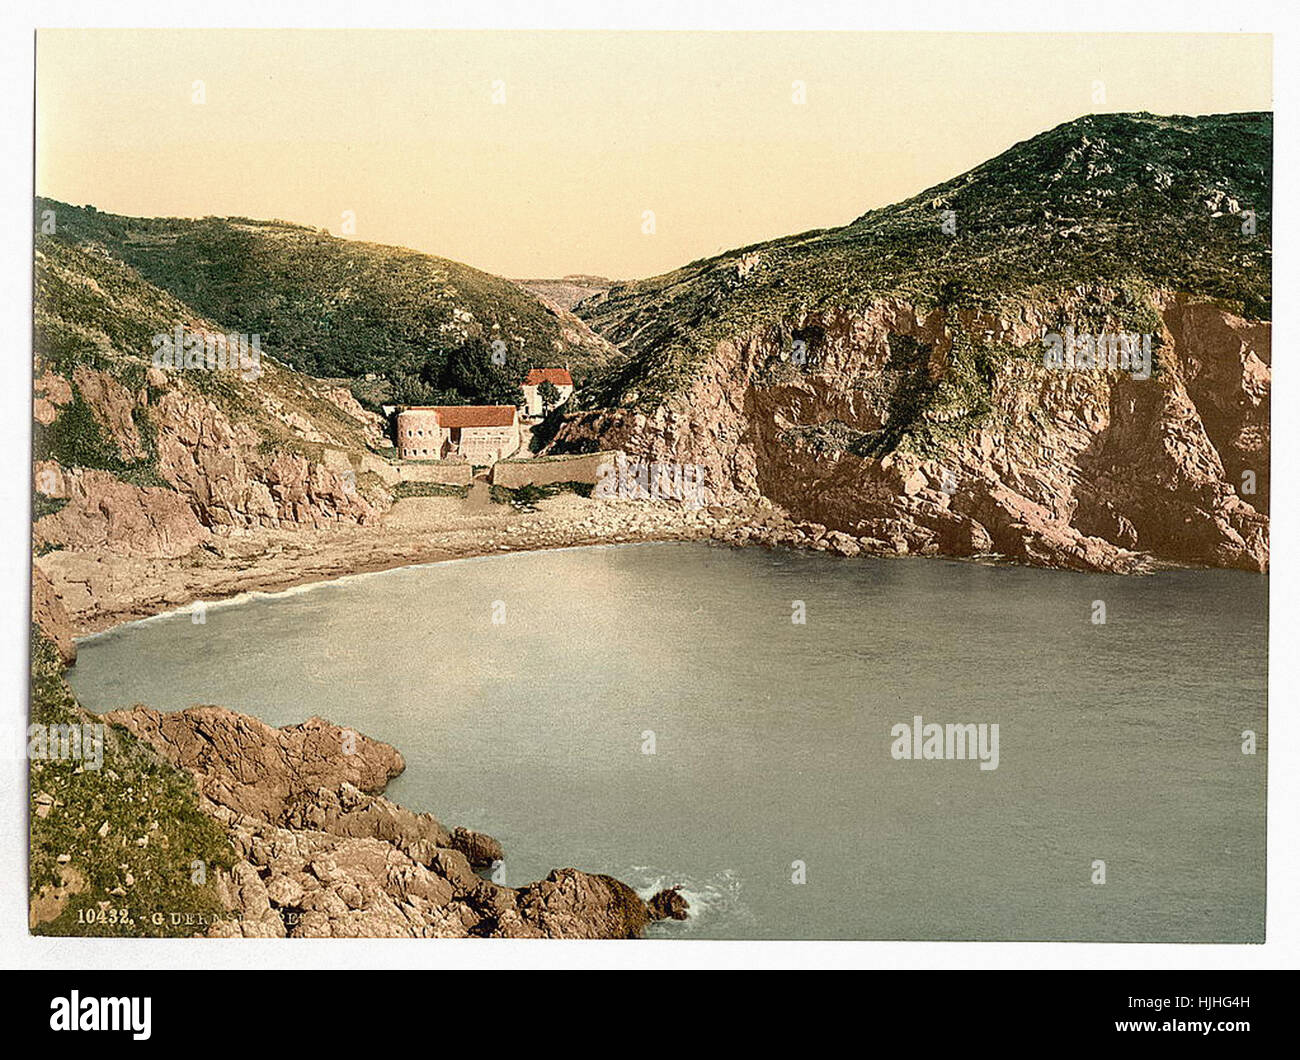 Guernsey, Petit Bot Bay, Isole del Canale - Photochrom XIX SECOLO Foto Stock